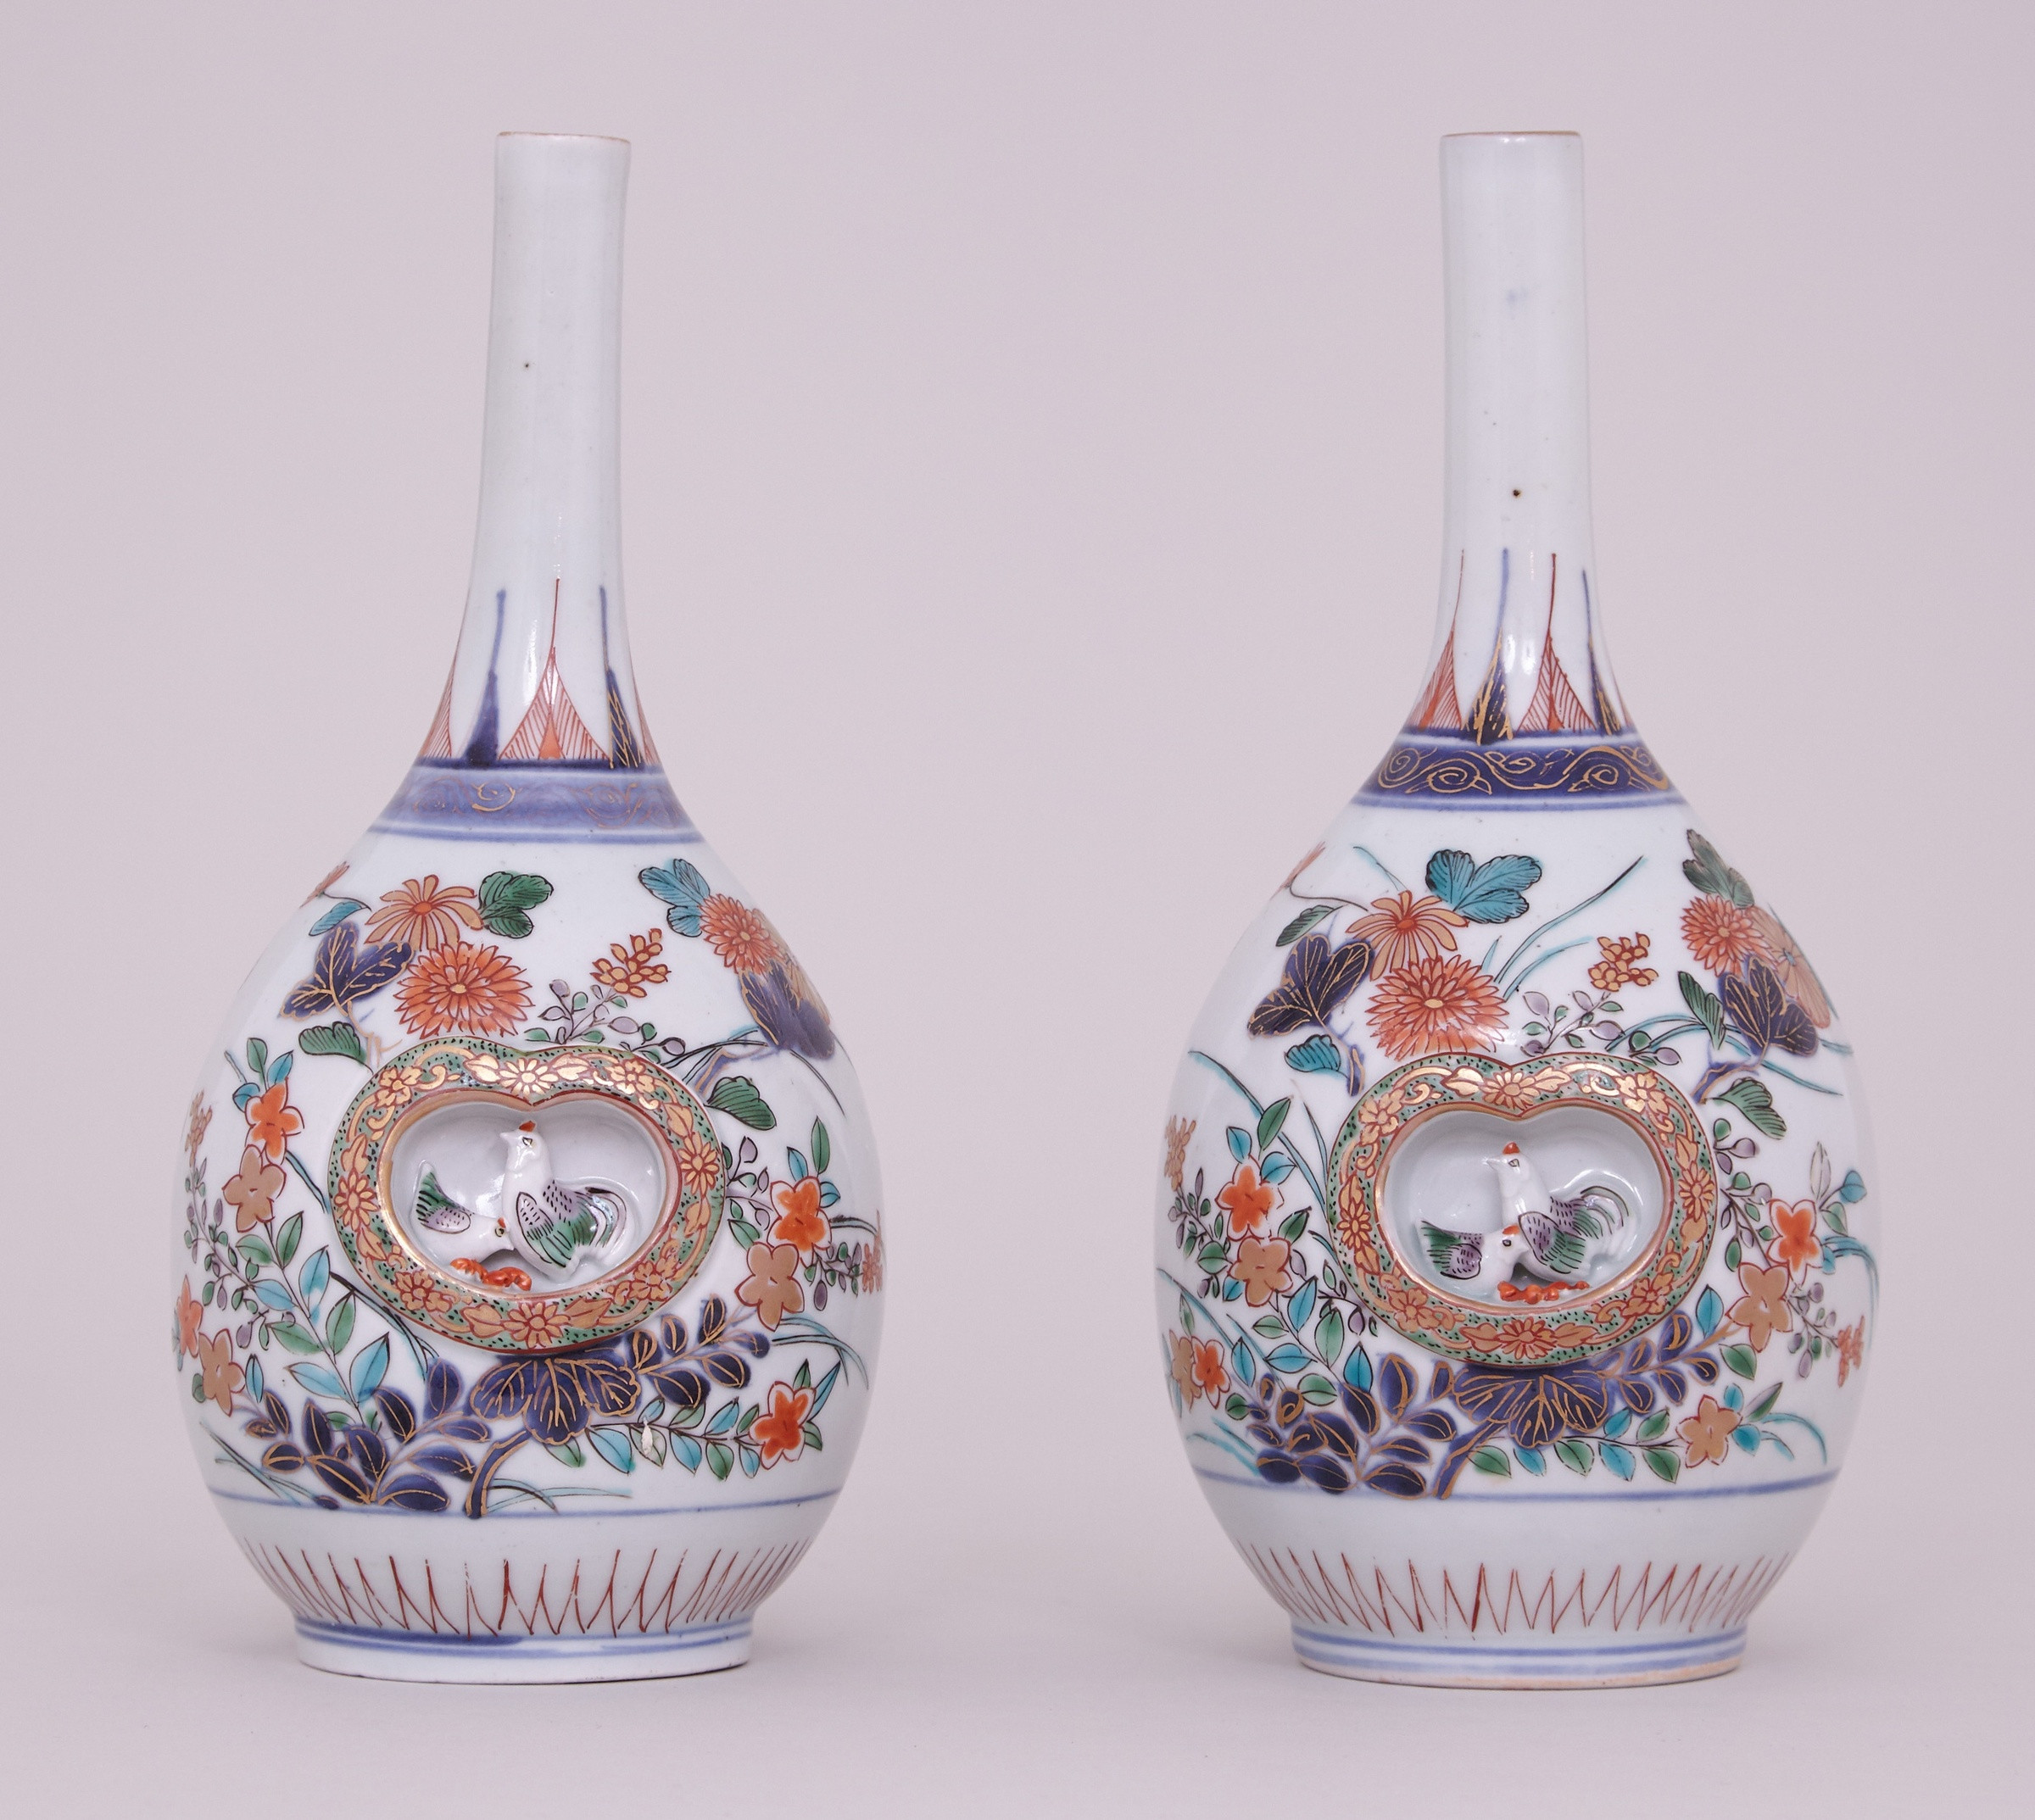 20 Perfect Chinese Vases History 2024 free download chinese vases history of a pair of fine japanese imari bottle vases late 17th early 18th for a pair of fine japanese imari bottle vases